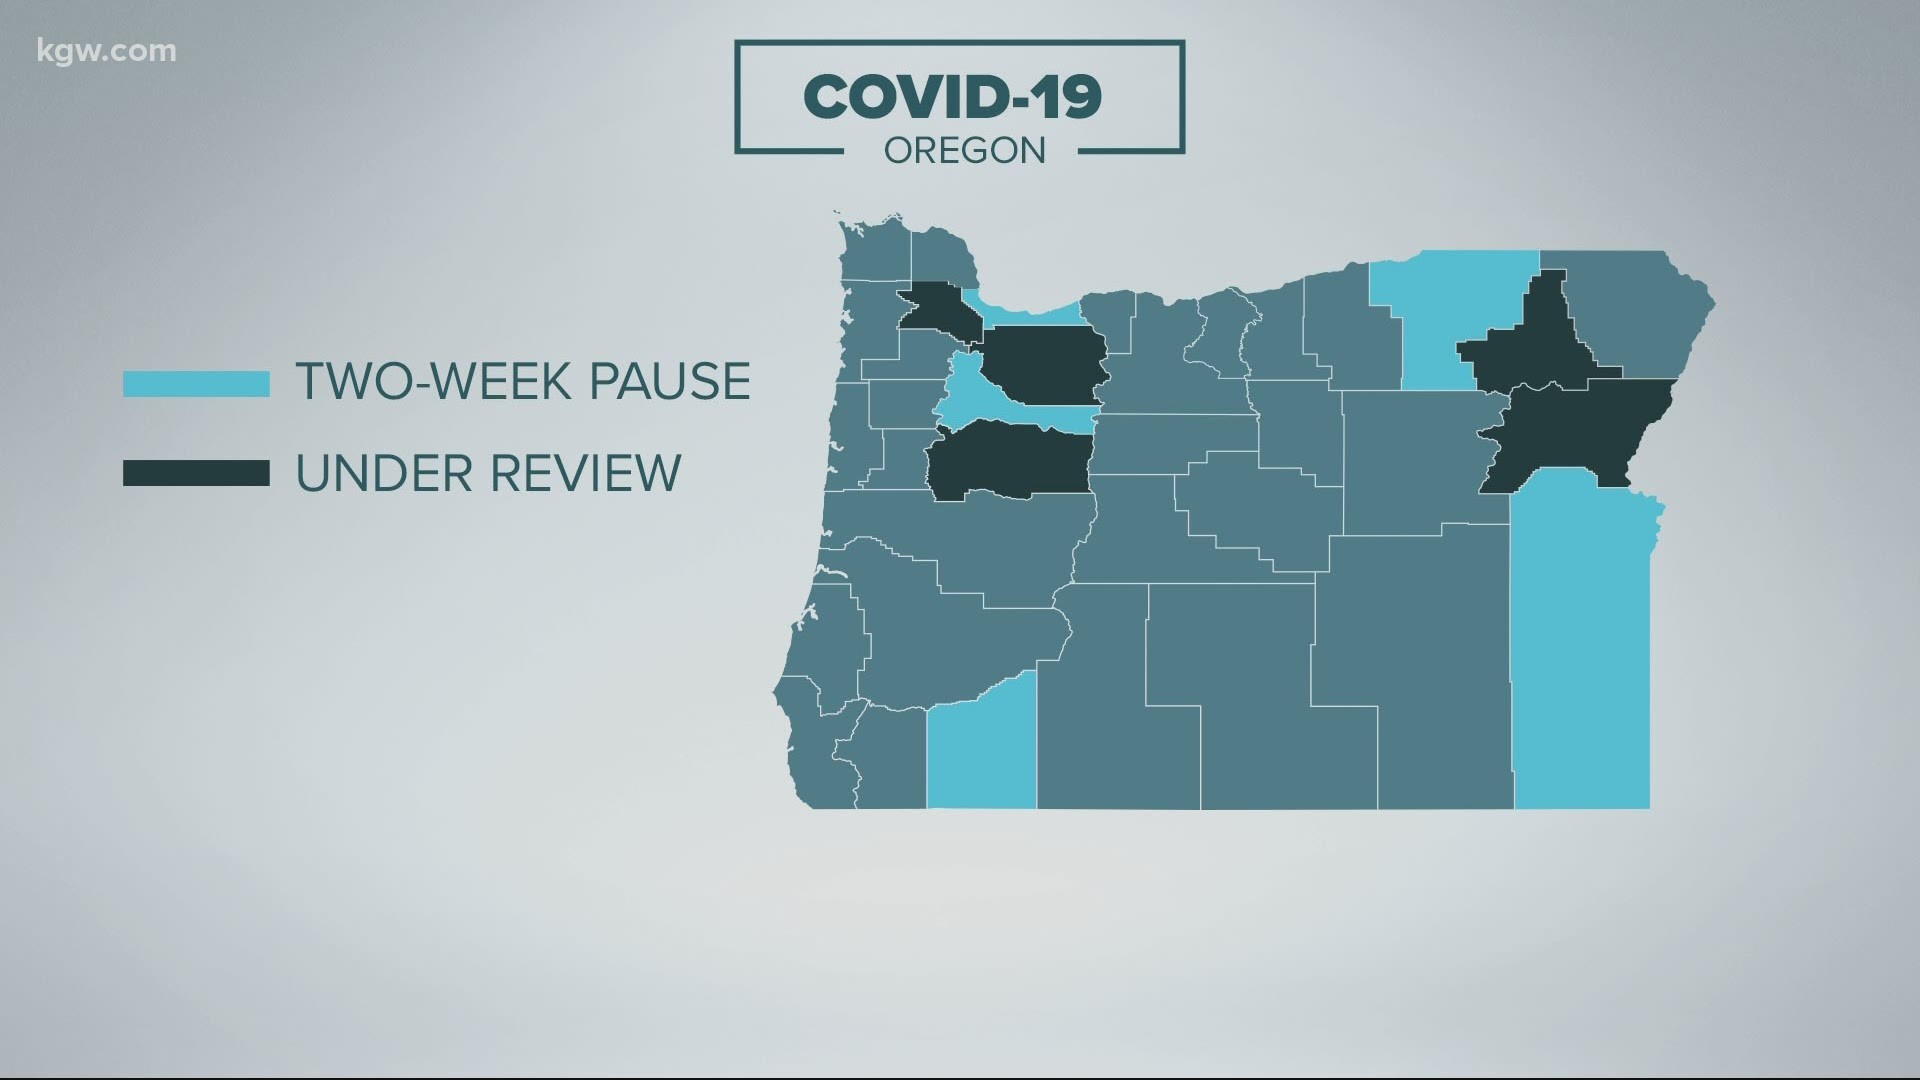 Oregon Gov. Kate Brown has ordered a two-week "pause" in social activities as part of the new COVID-19 restrictions released today.